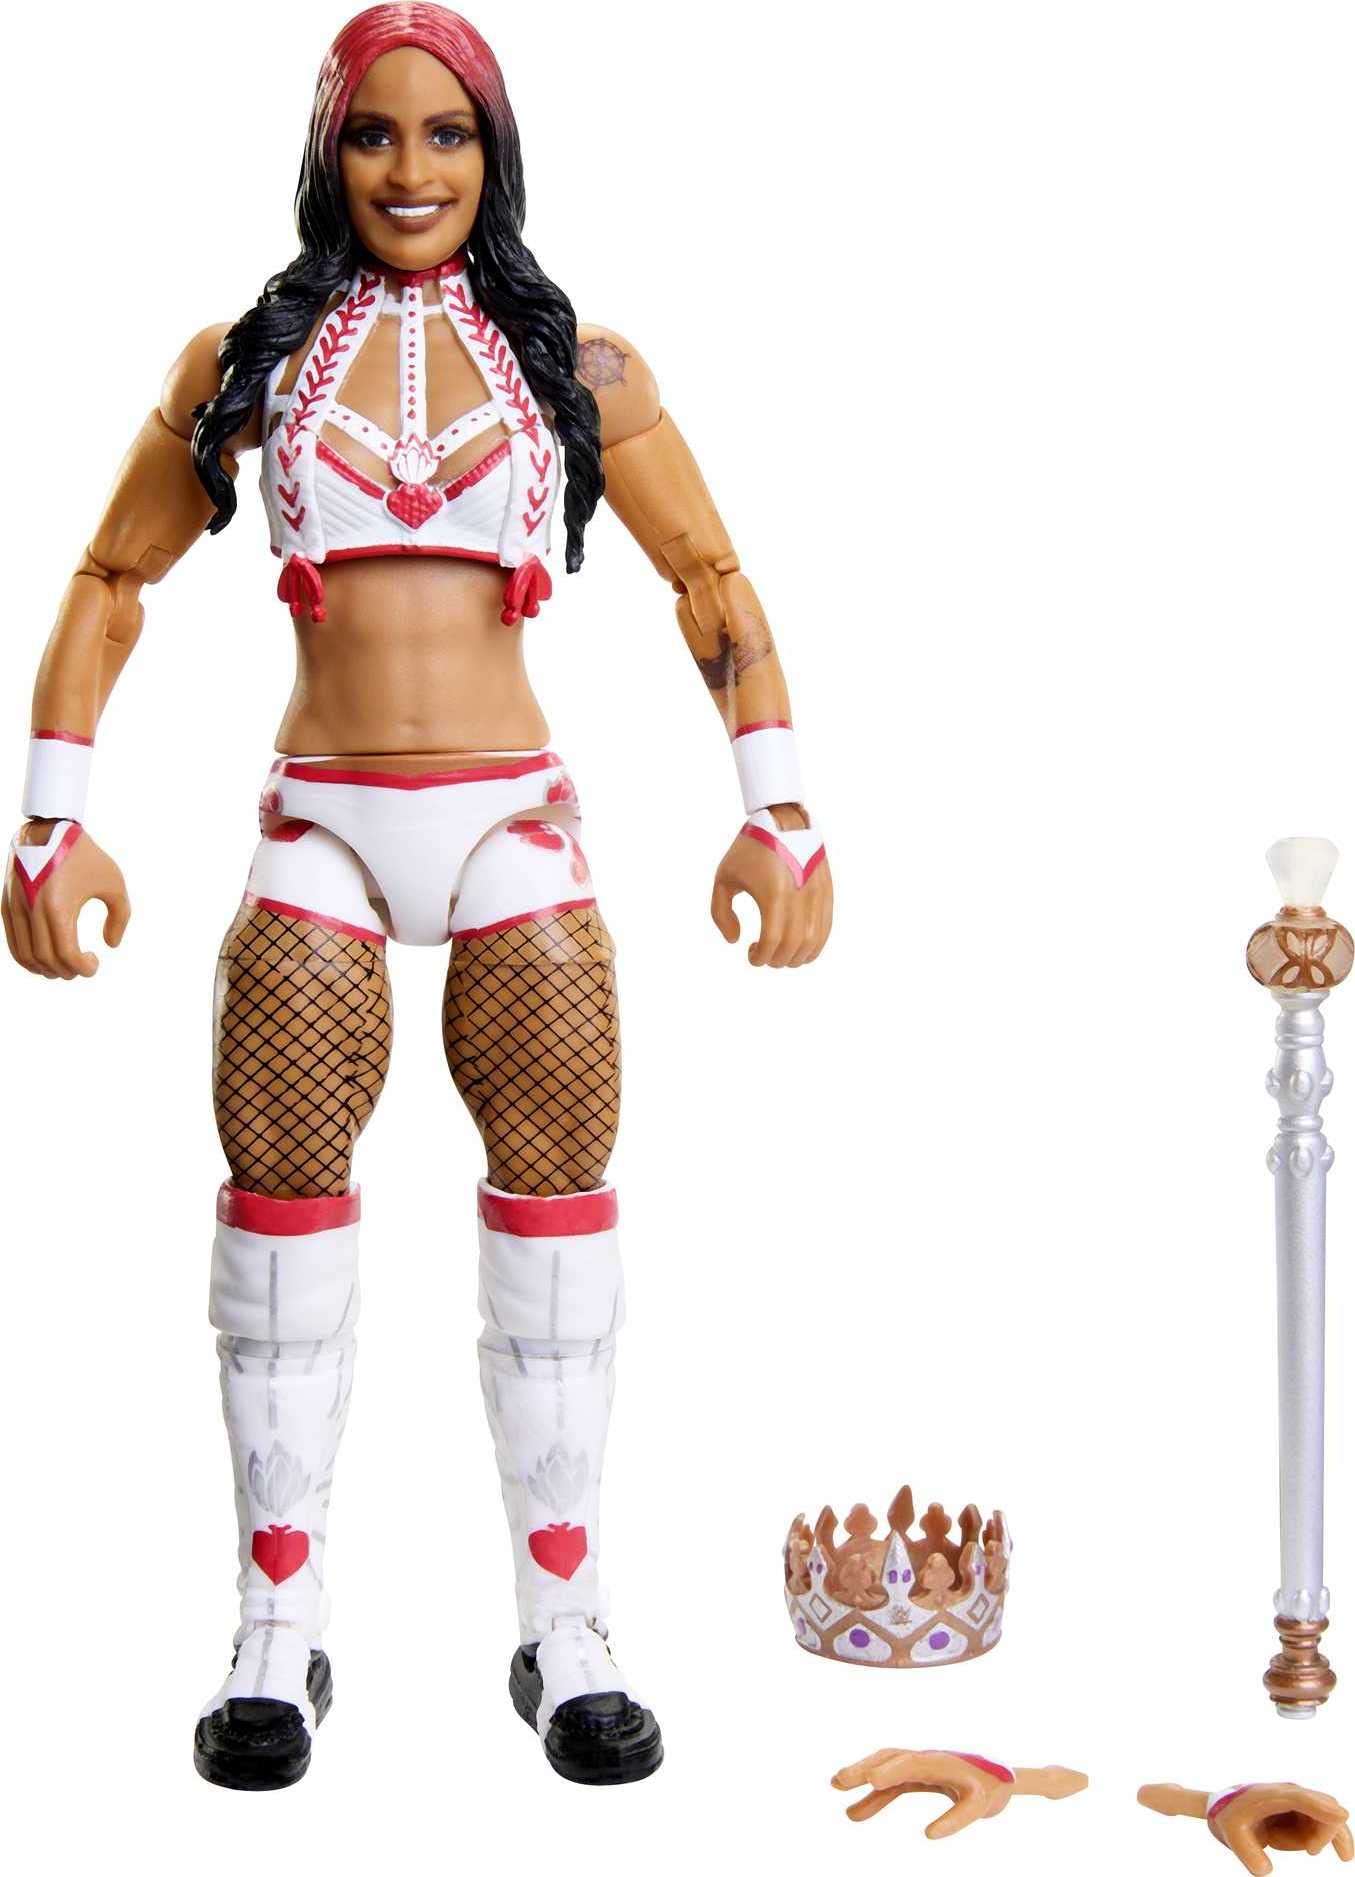 Mattel WWE Queen Zelina Elite Collection Action Figure, Deluxe Articulation & Life-Like Detail with Iconic Accessories, 6-Inch